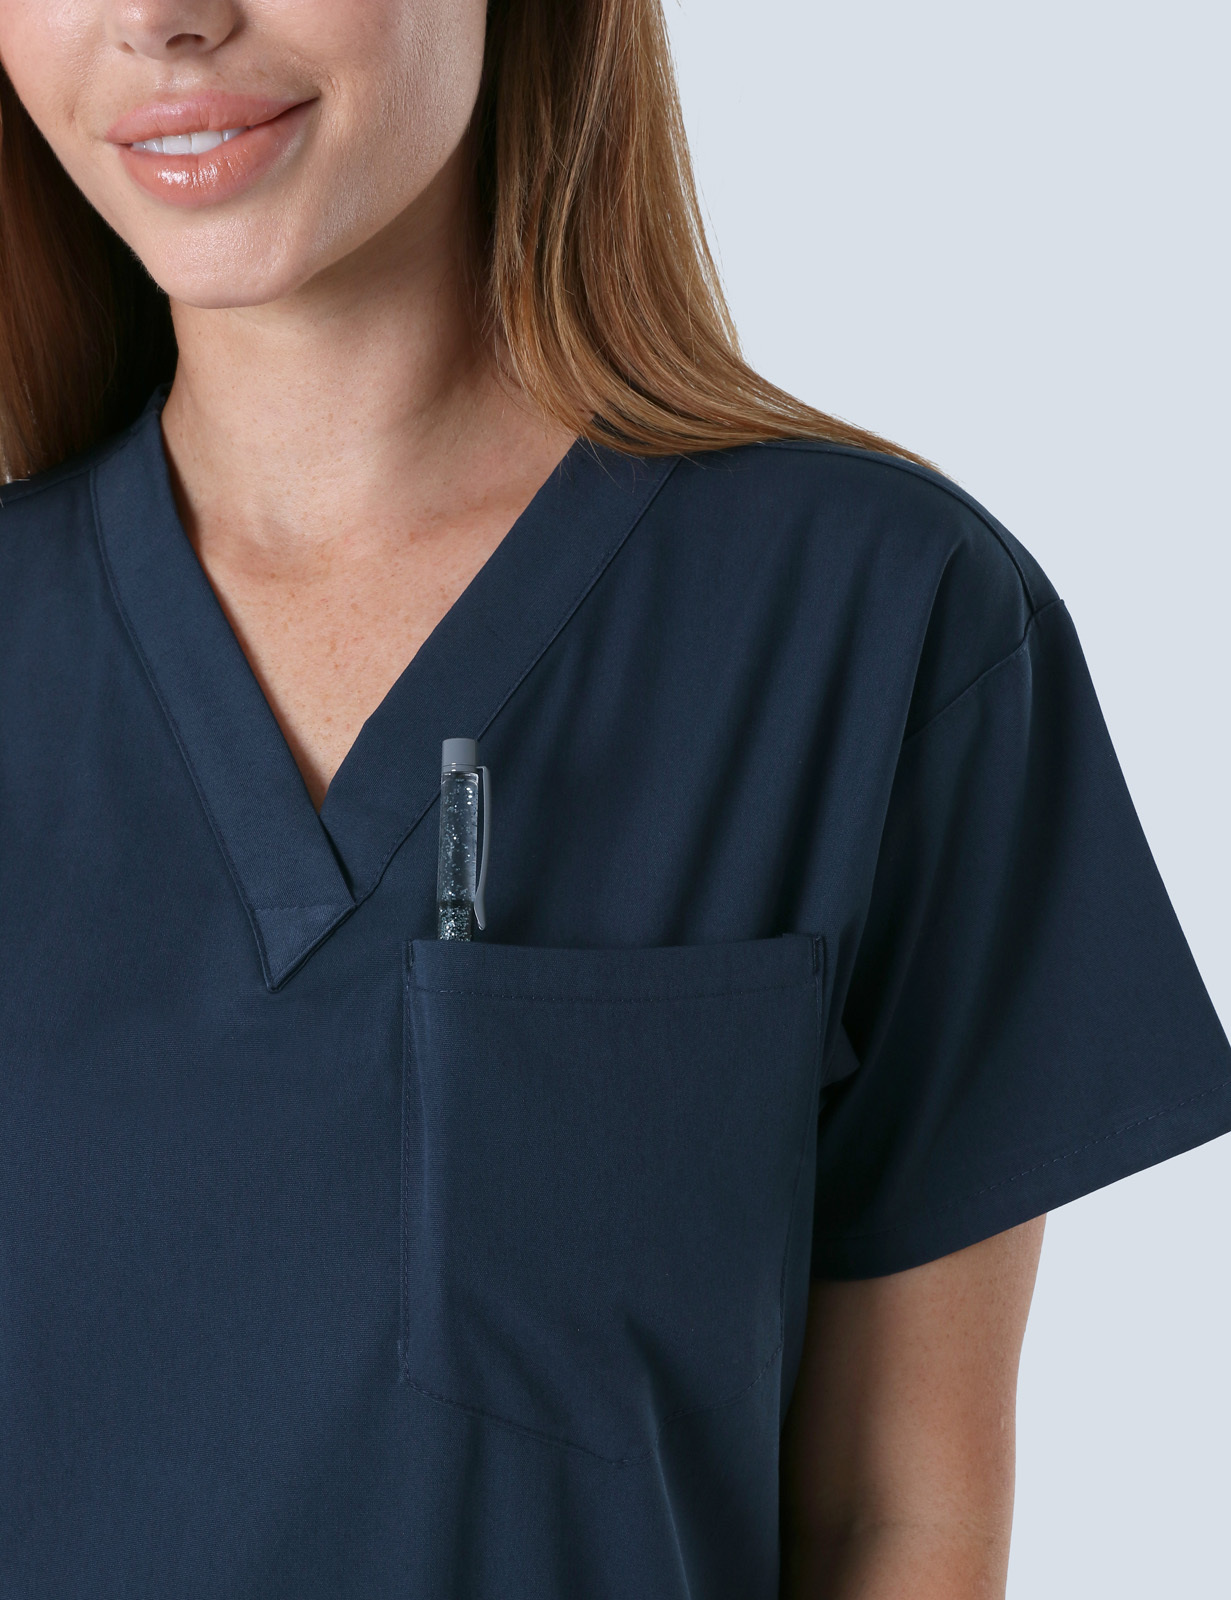 Gladstone Hospital - ED RN (4 Pocket Scrub Top and Cargo Pants in Navy incl Logos)